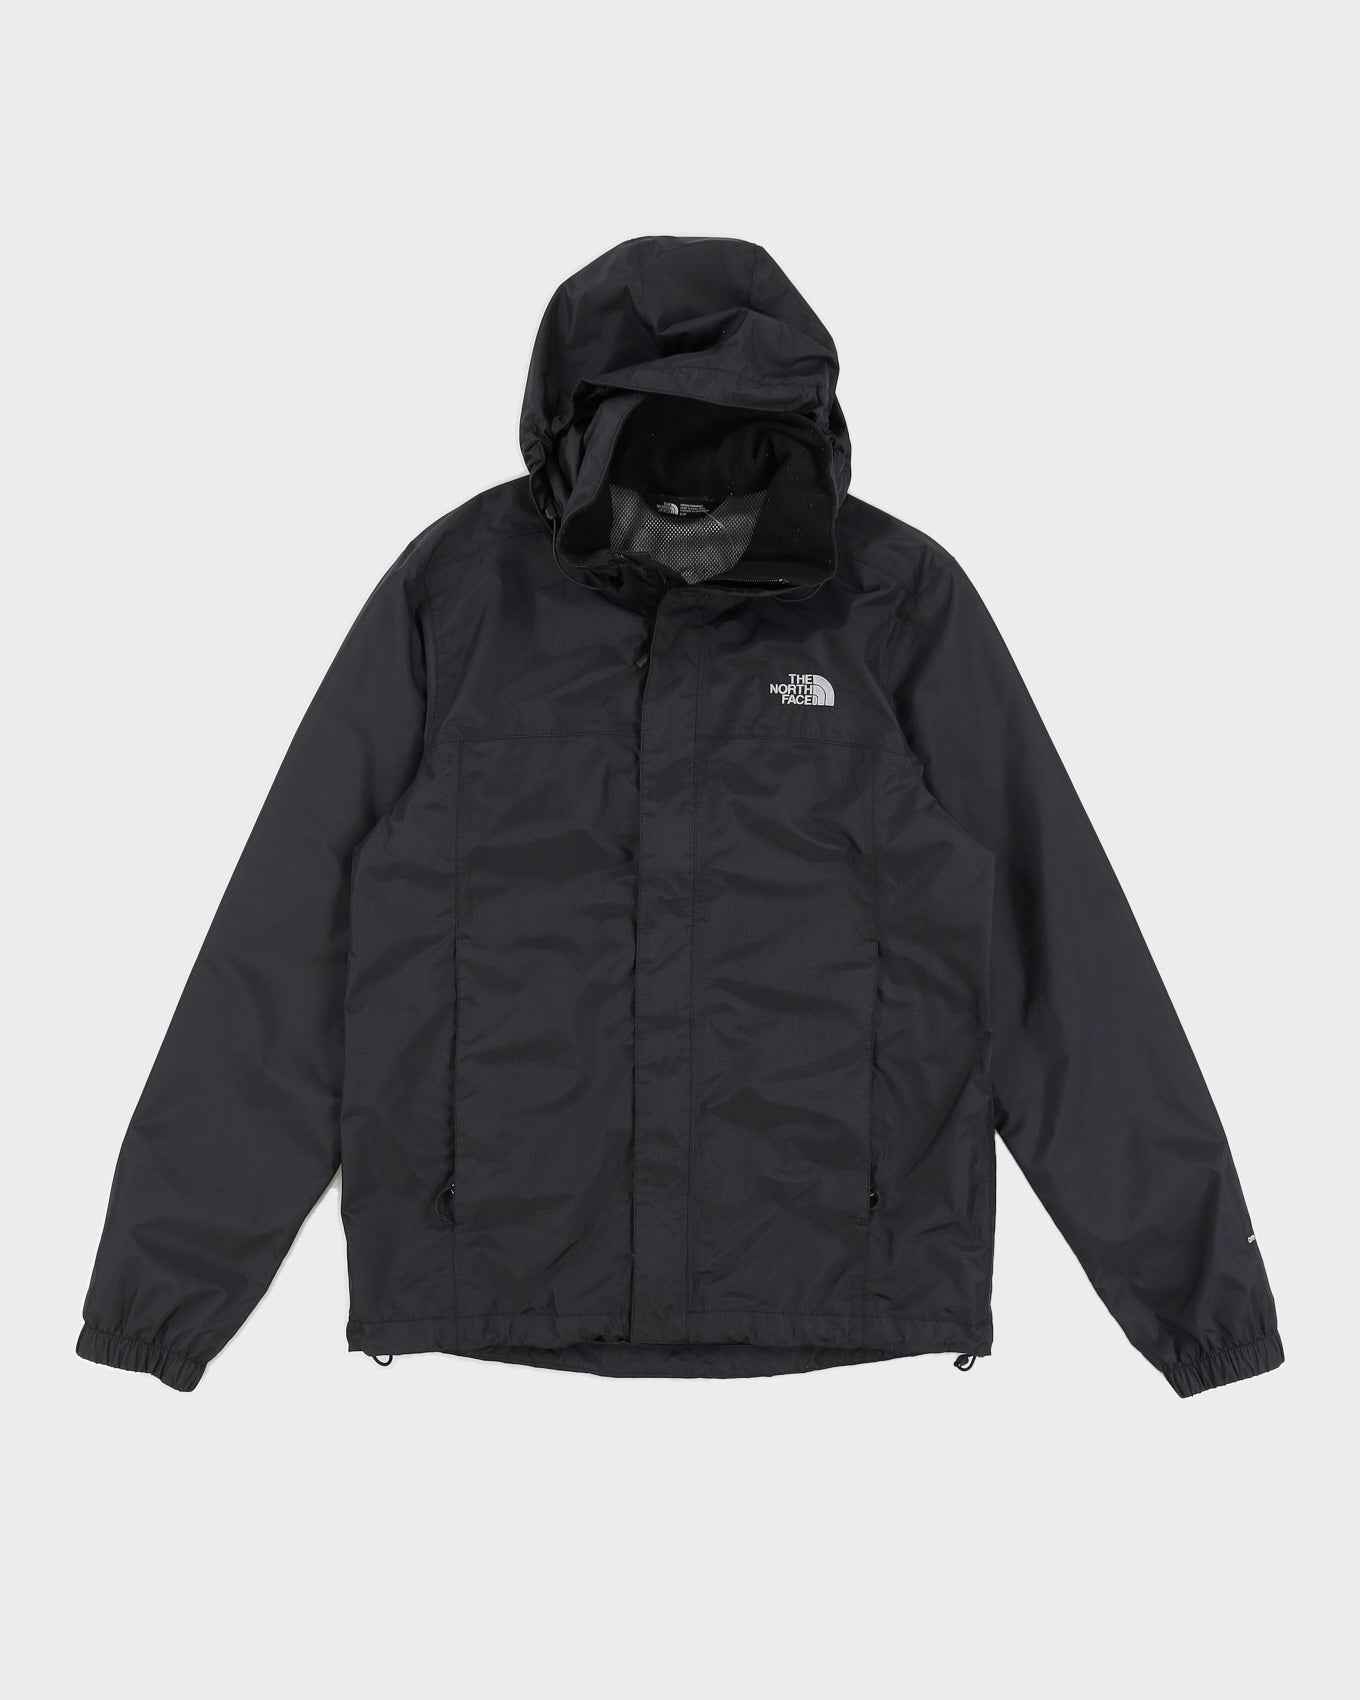 The North Face Black DryVent Hooded Jacket - S